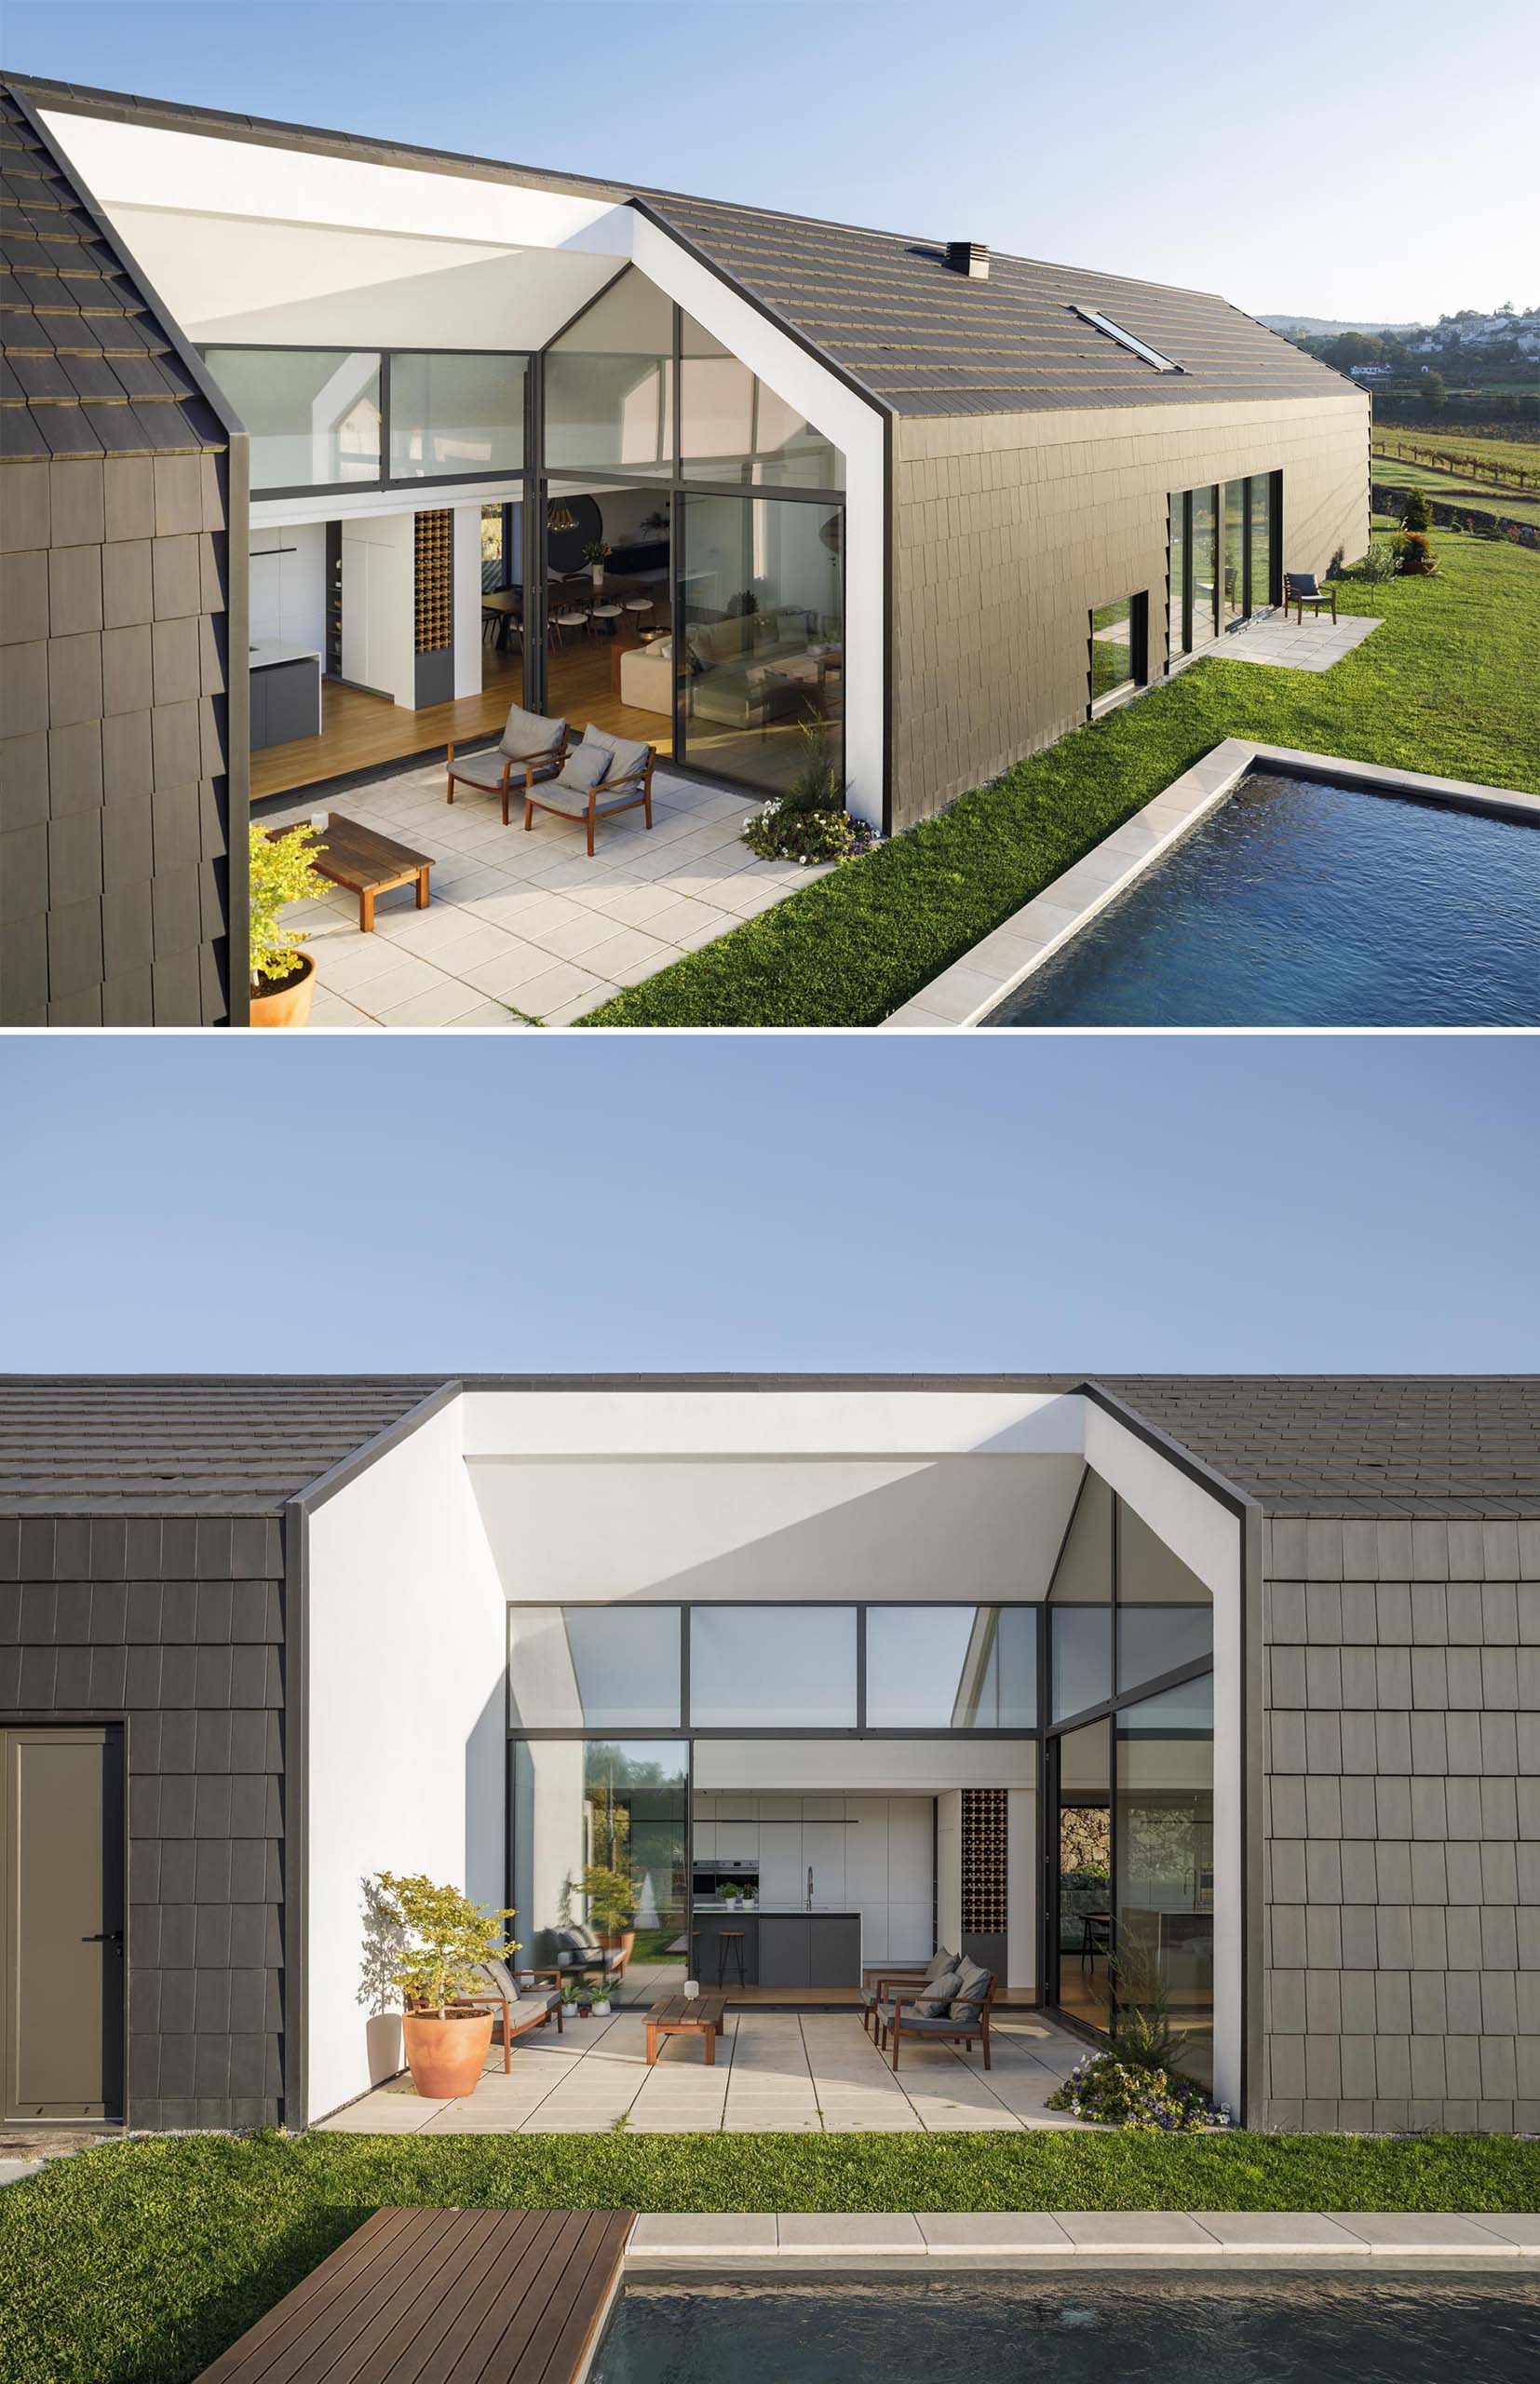 A modern house open to a small patio, the yard, and a swimming pool.